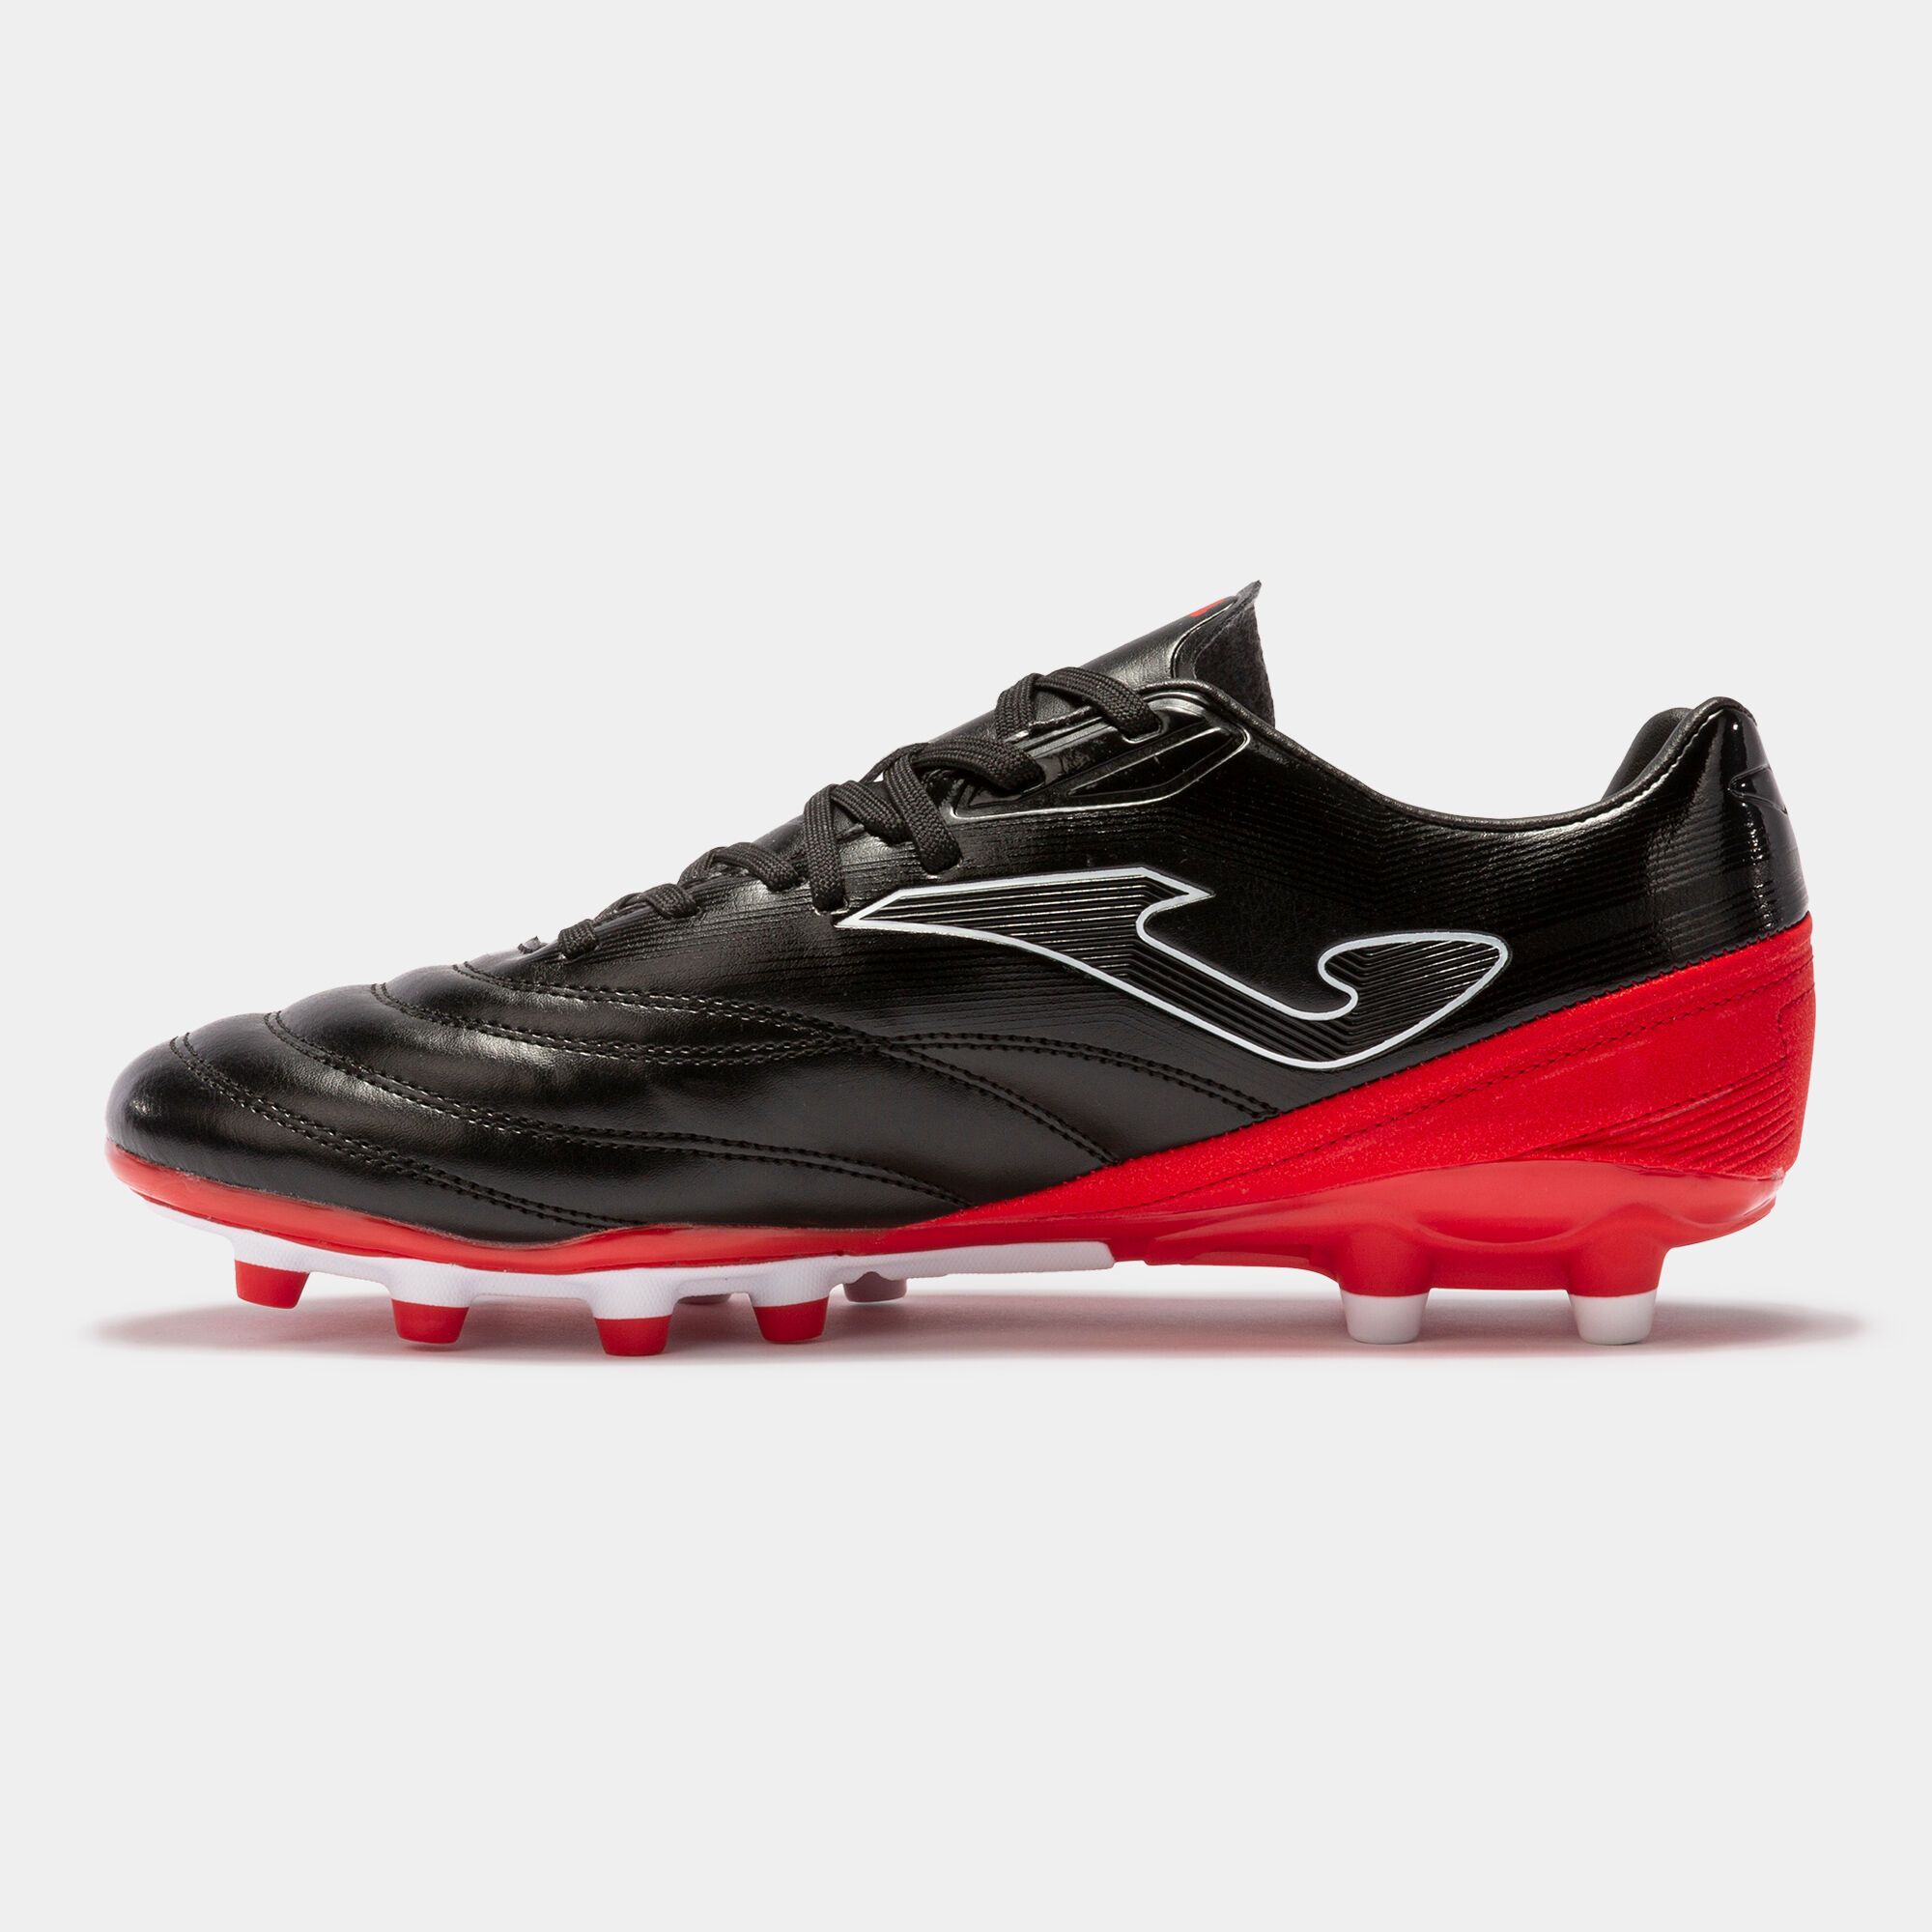 FOOTBALL BOOTS N-10 22 FIRM GROUND FG BLACK RED